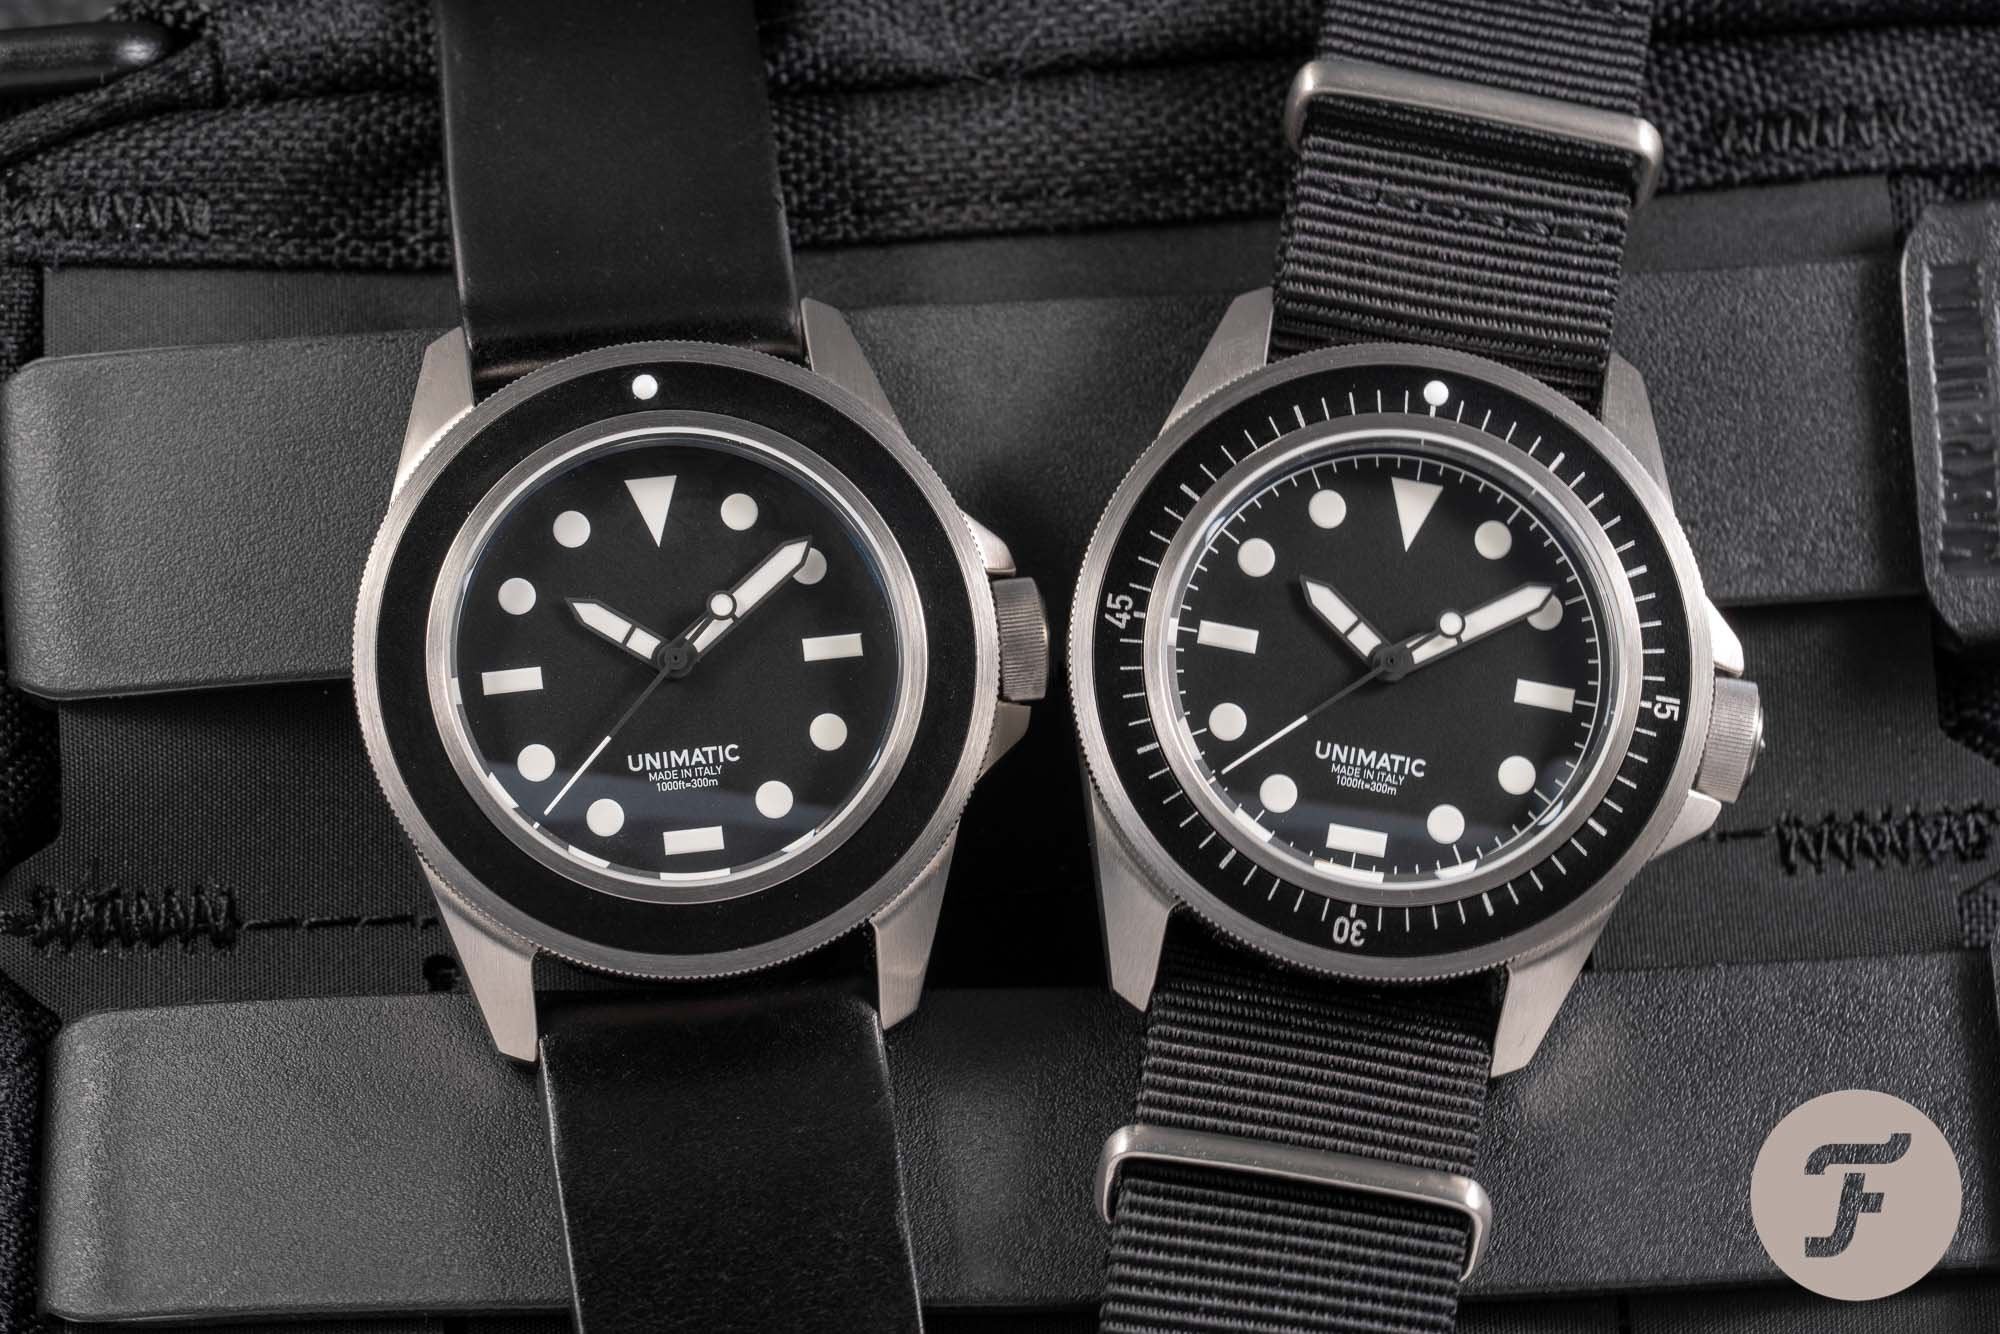 Dialed Back Diver: A Study Of The Unimatic Modello Uno Watches